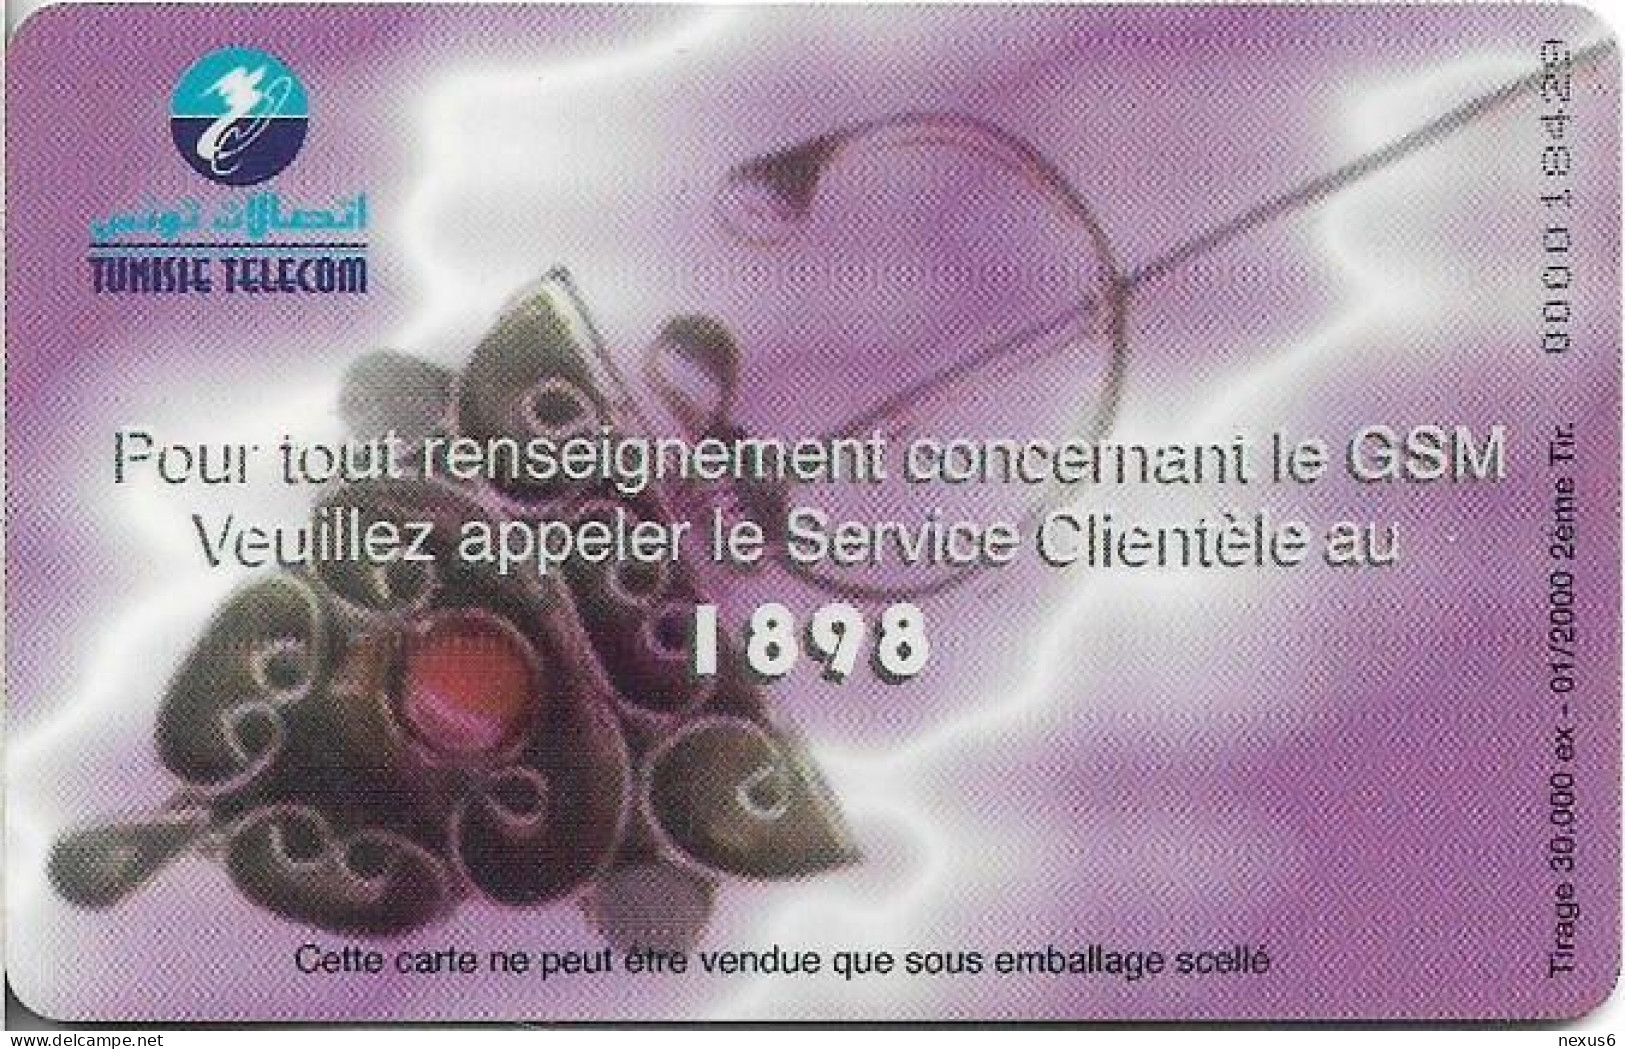 Tunisia - Tunisie Telecom - Global System For Mobile Comm., 100Units, Chip Oberthur, 01.2000, 30.000ex, Used - Tunesië